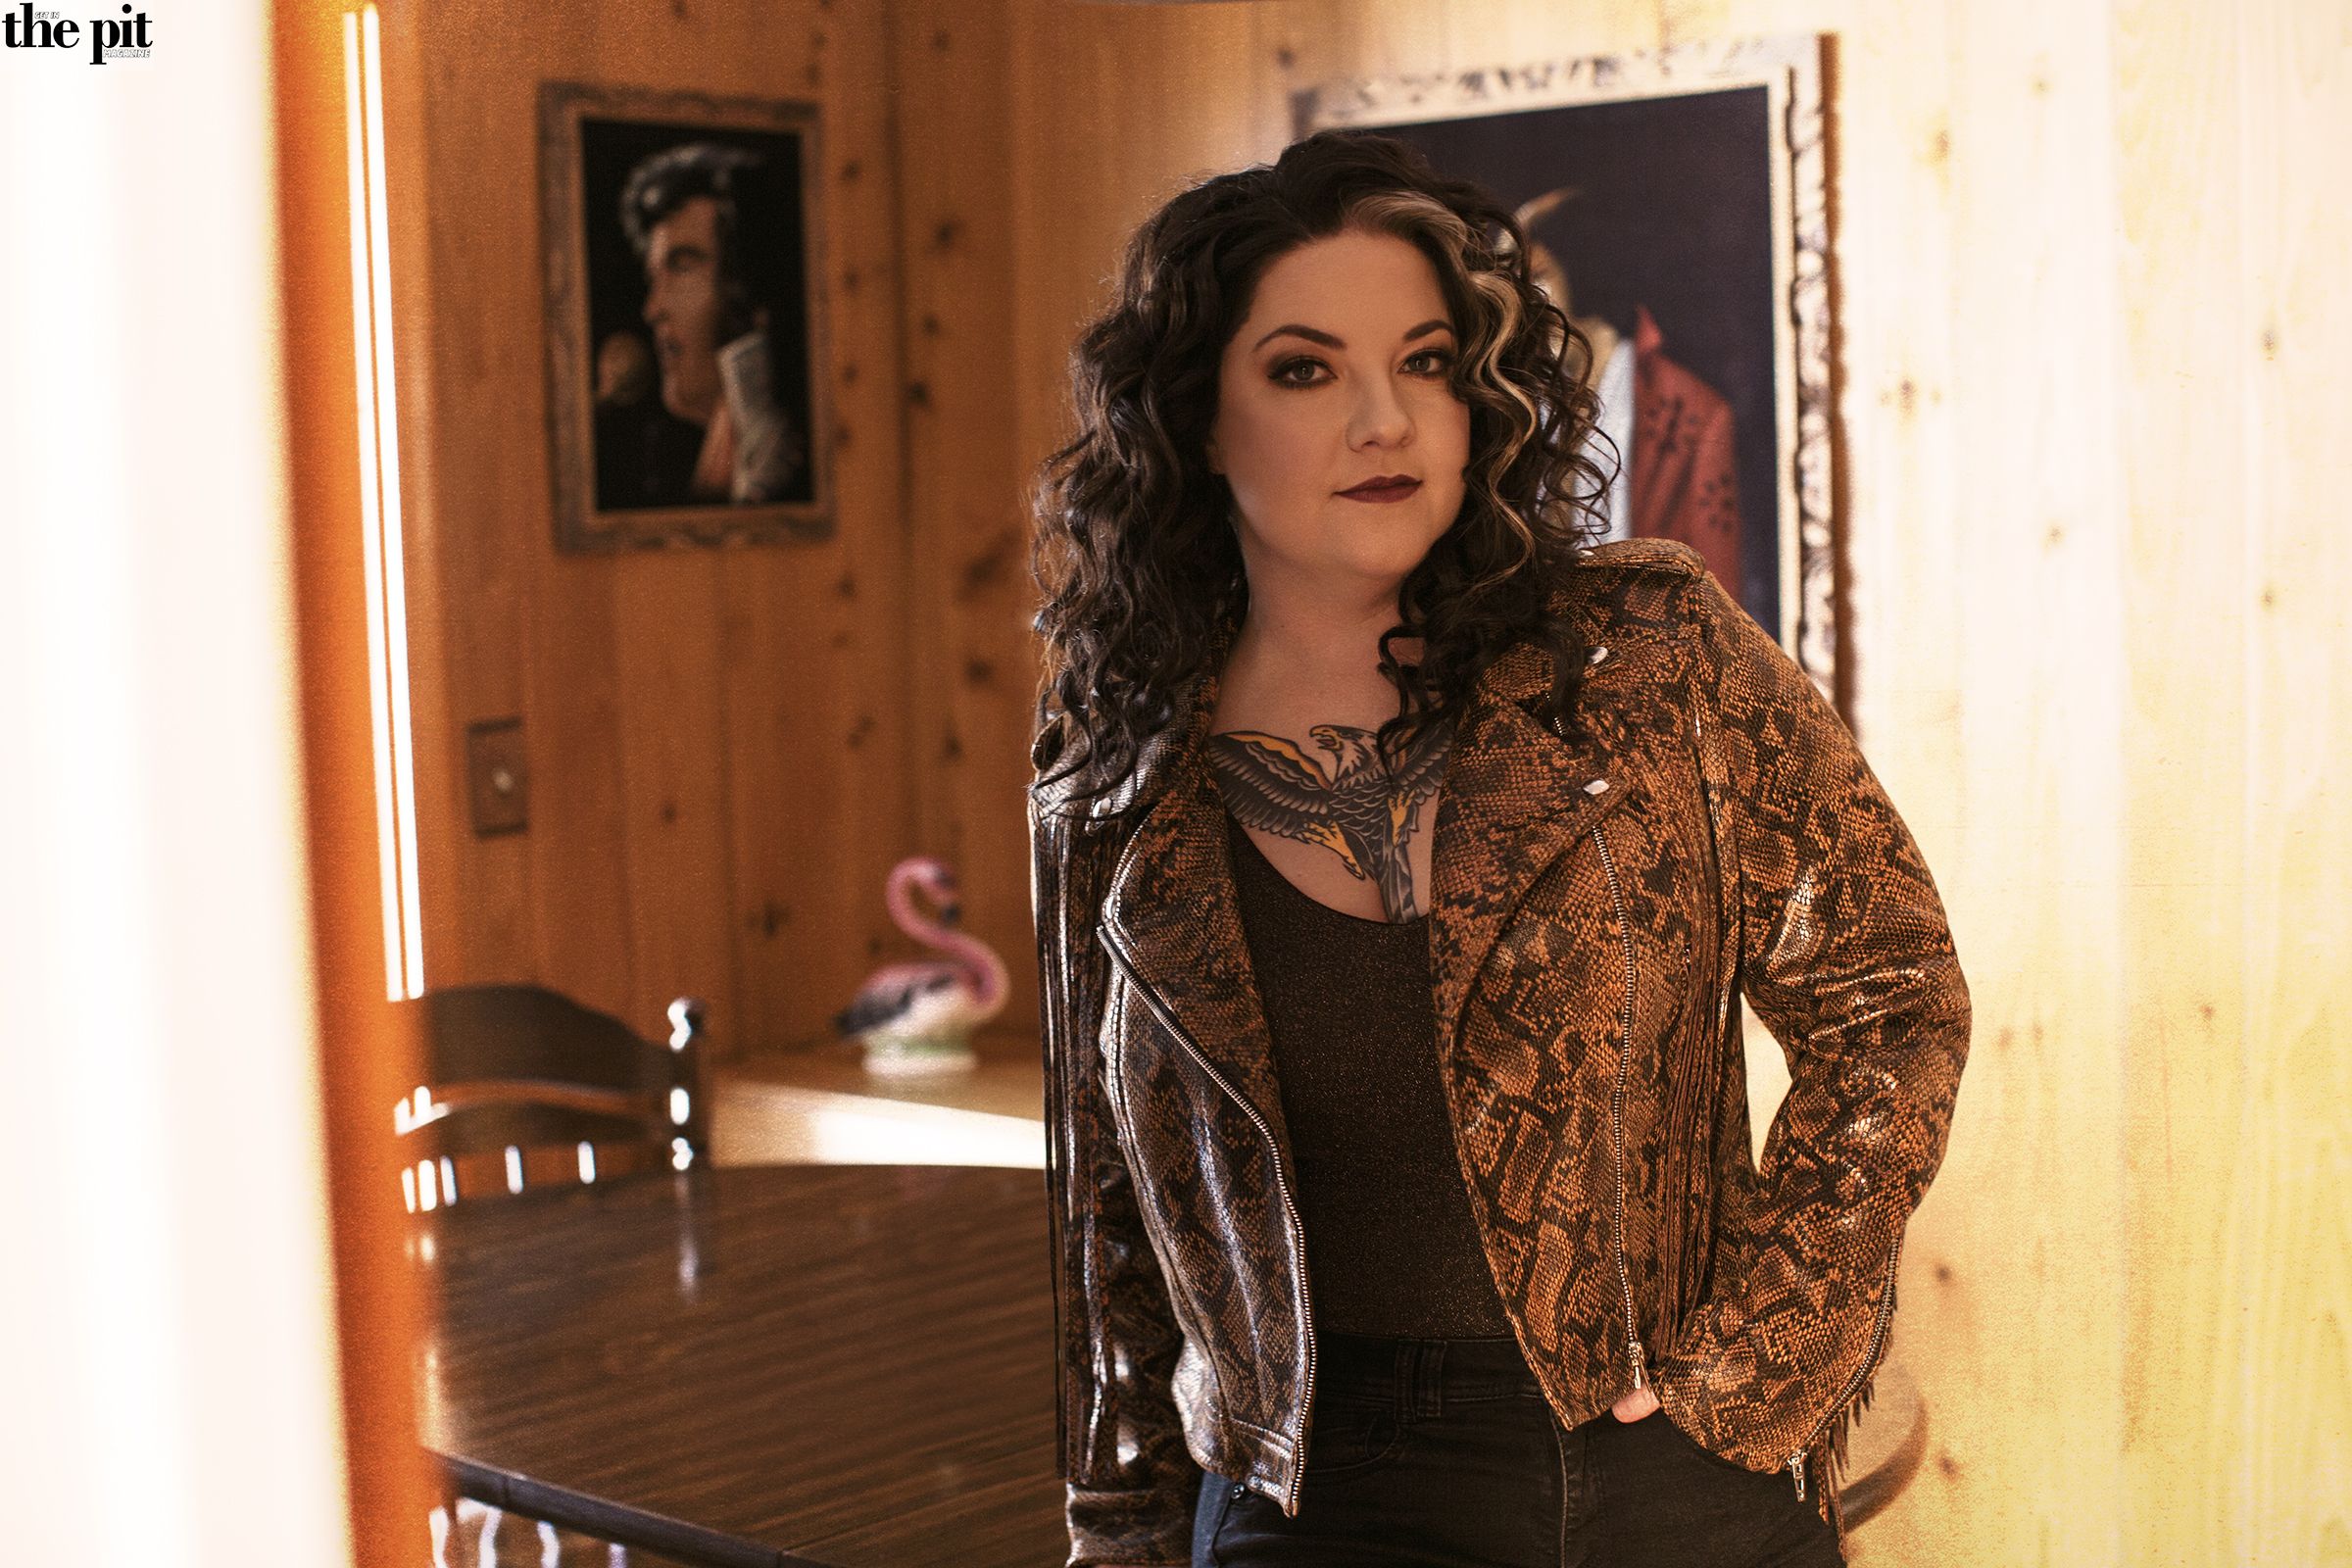 Ashley McBryde stands confidently in a room with wood-paneled walls, wearing a patterned jacket and jeans.